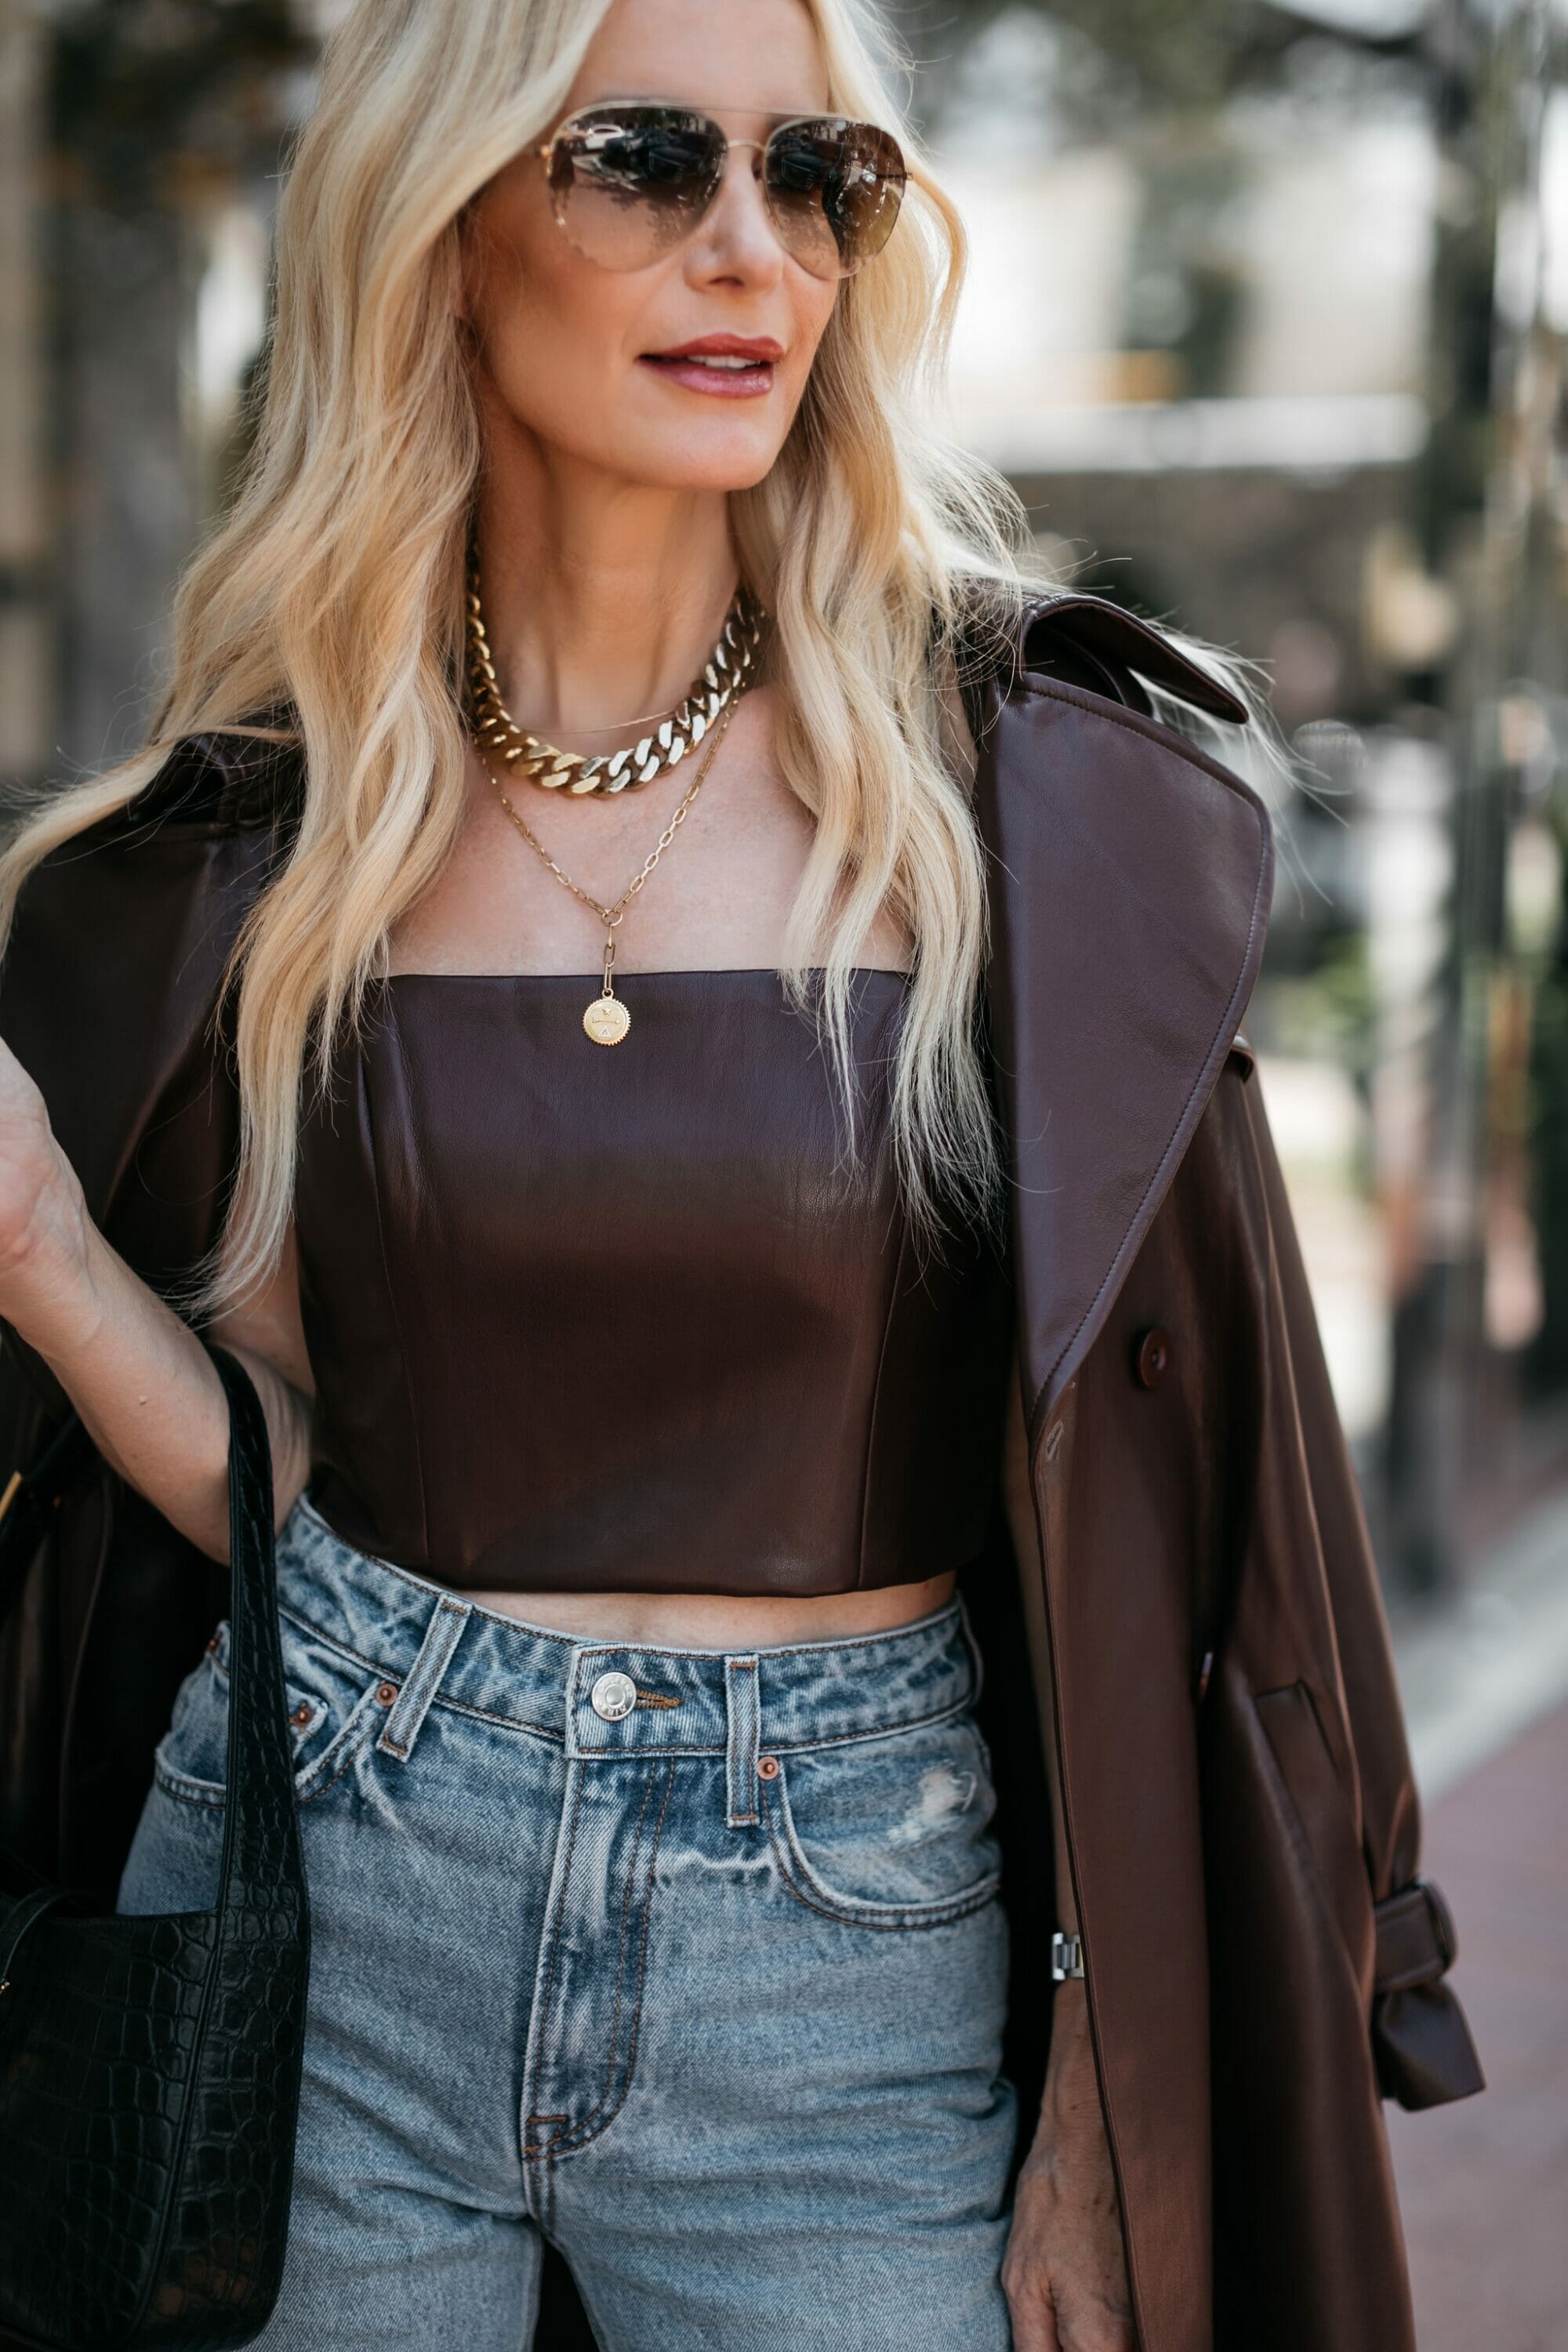 Over 40 fashion blogger wearing brown leather corset top and matching trench coat from Alice & Oliva and 2 items part of the Saks friends and family sale. 